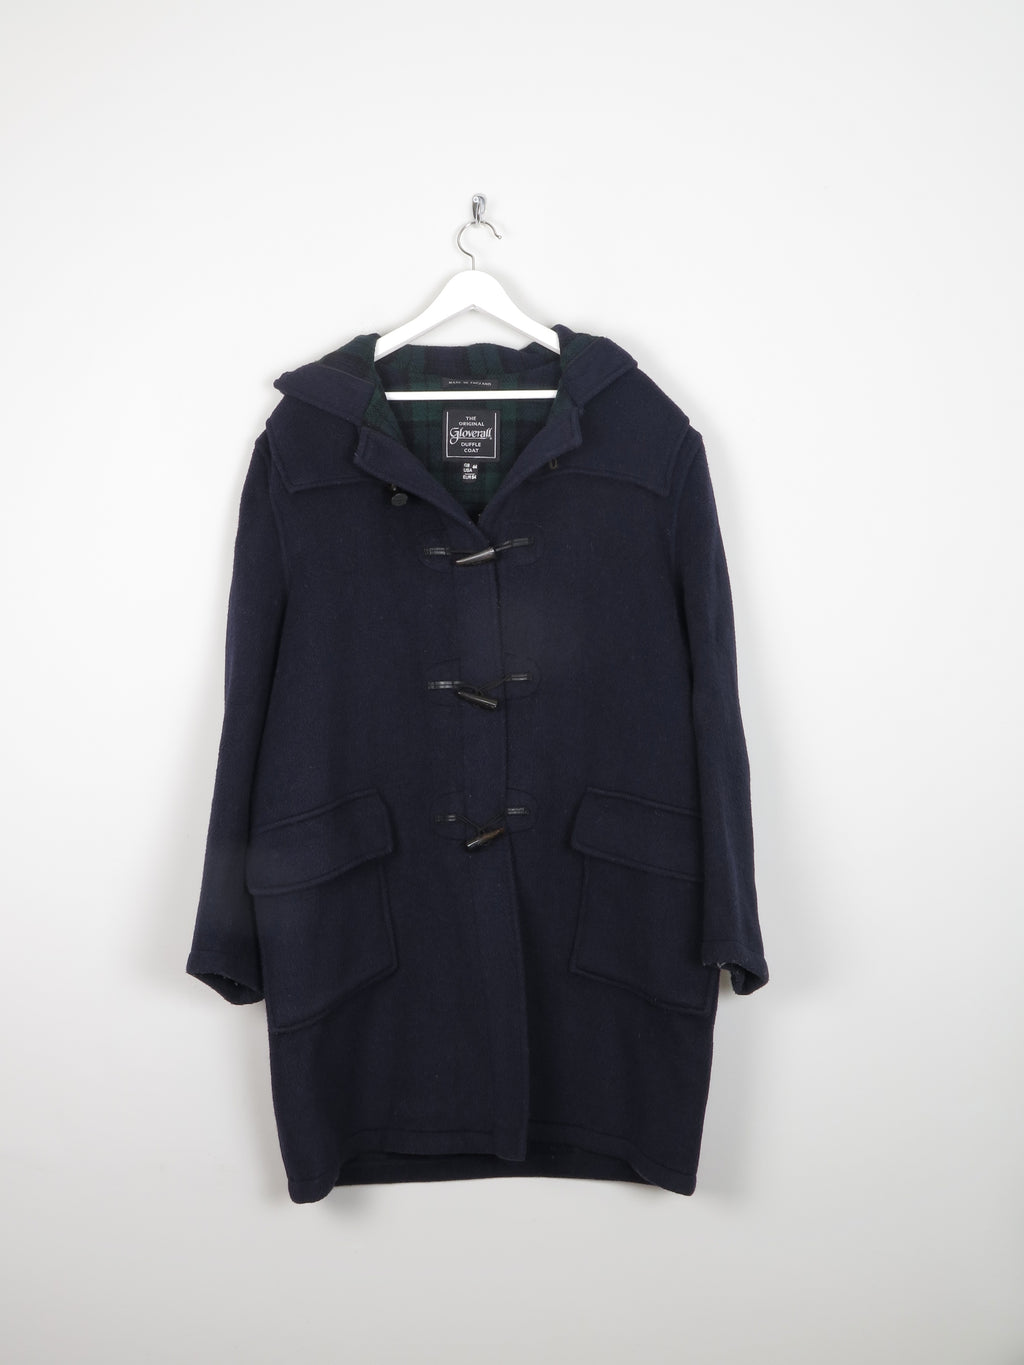 Navy Vintage Gloverall Mens Duffle Coat L 44